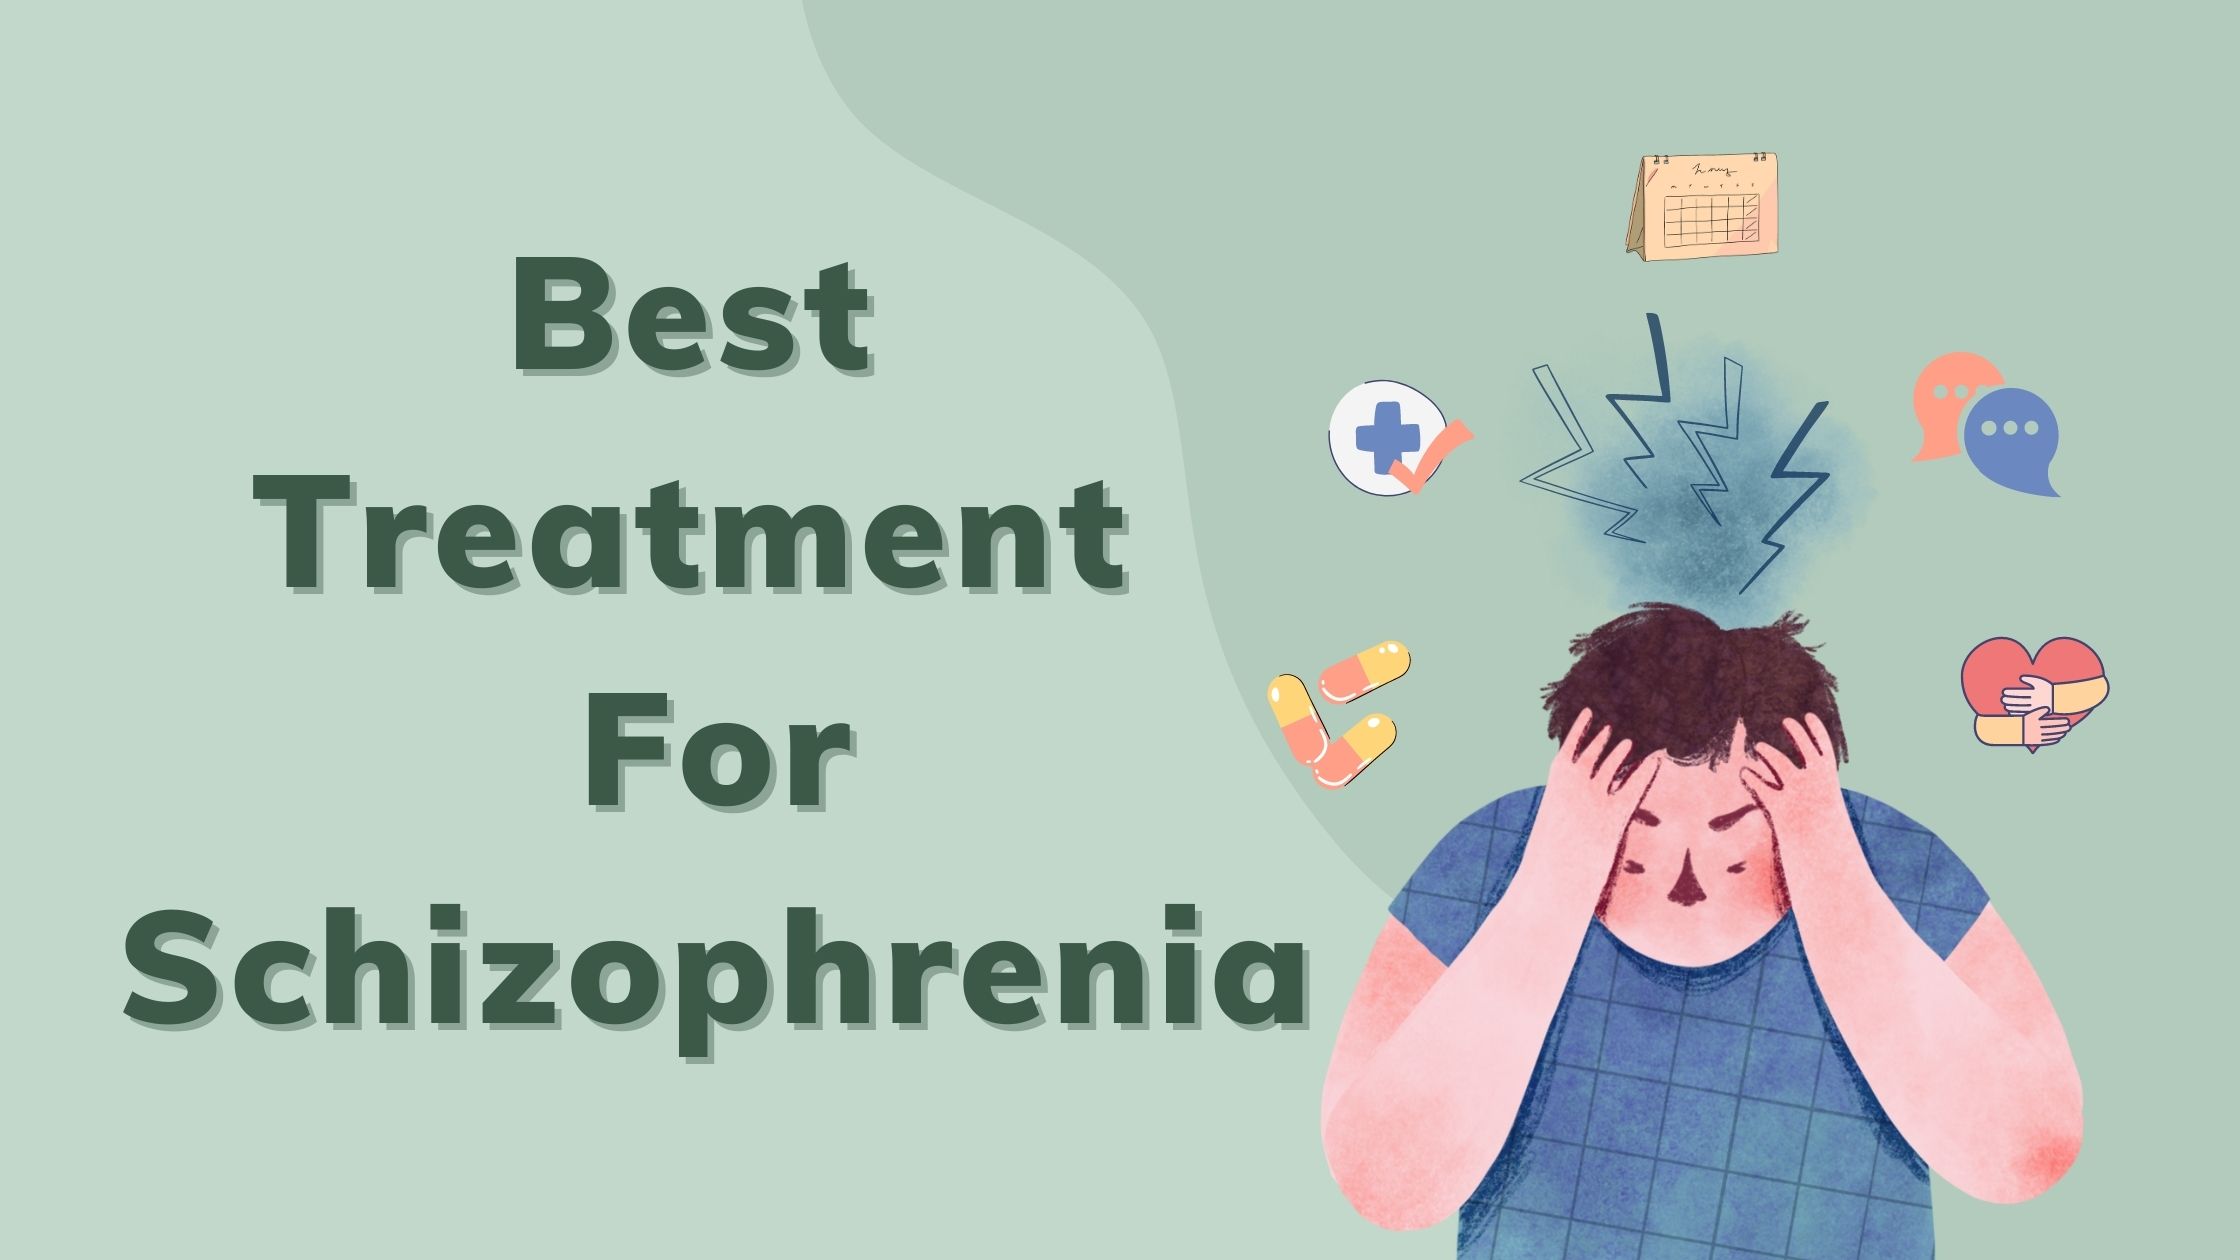 Looking for the best treatment for schizophrenia. Could it be medicine, therapy or community support? The blog post explains it all.